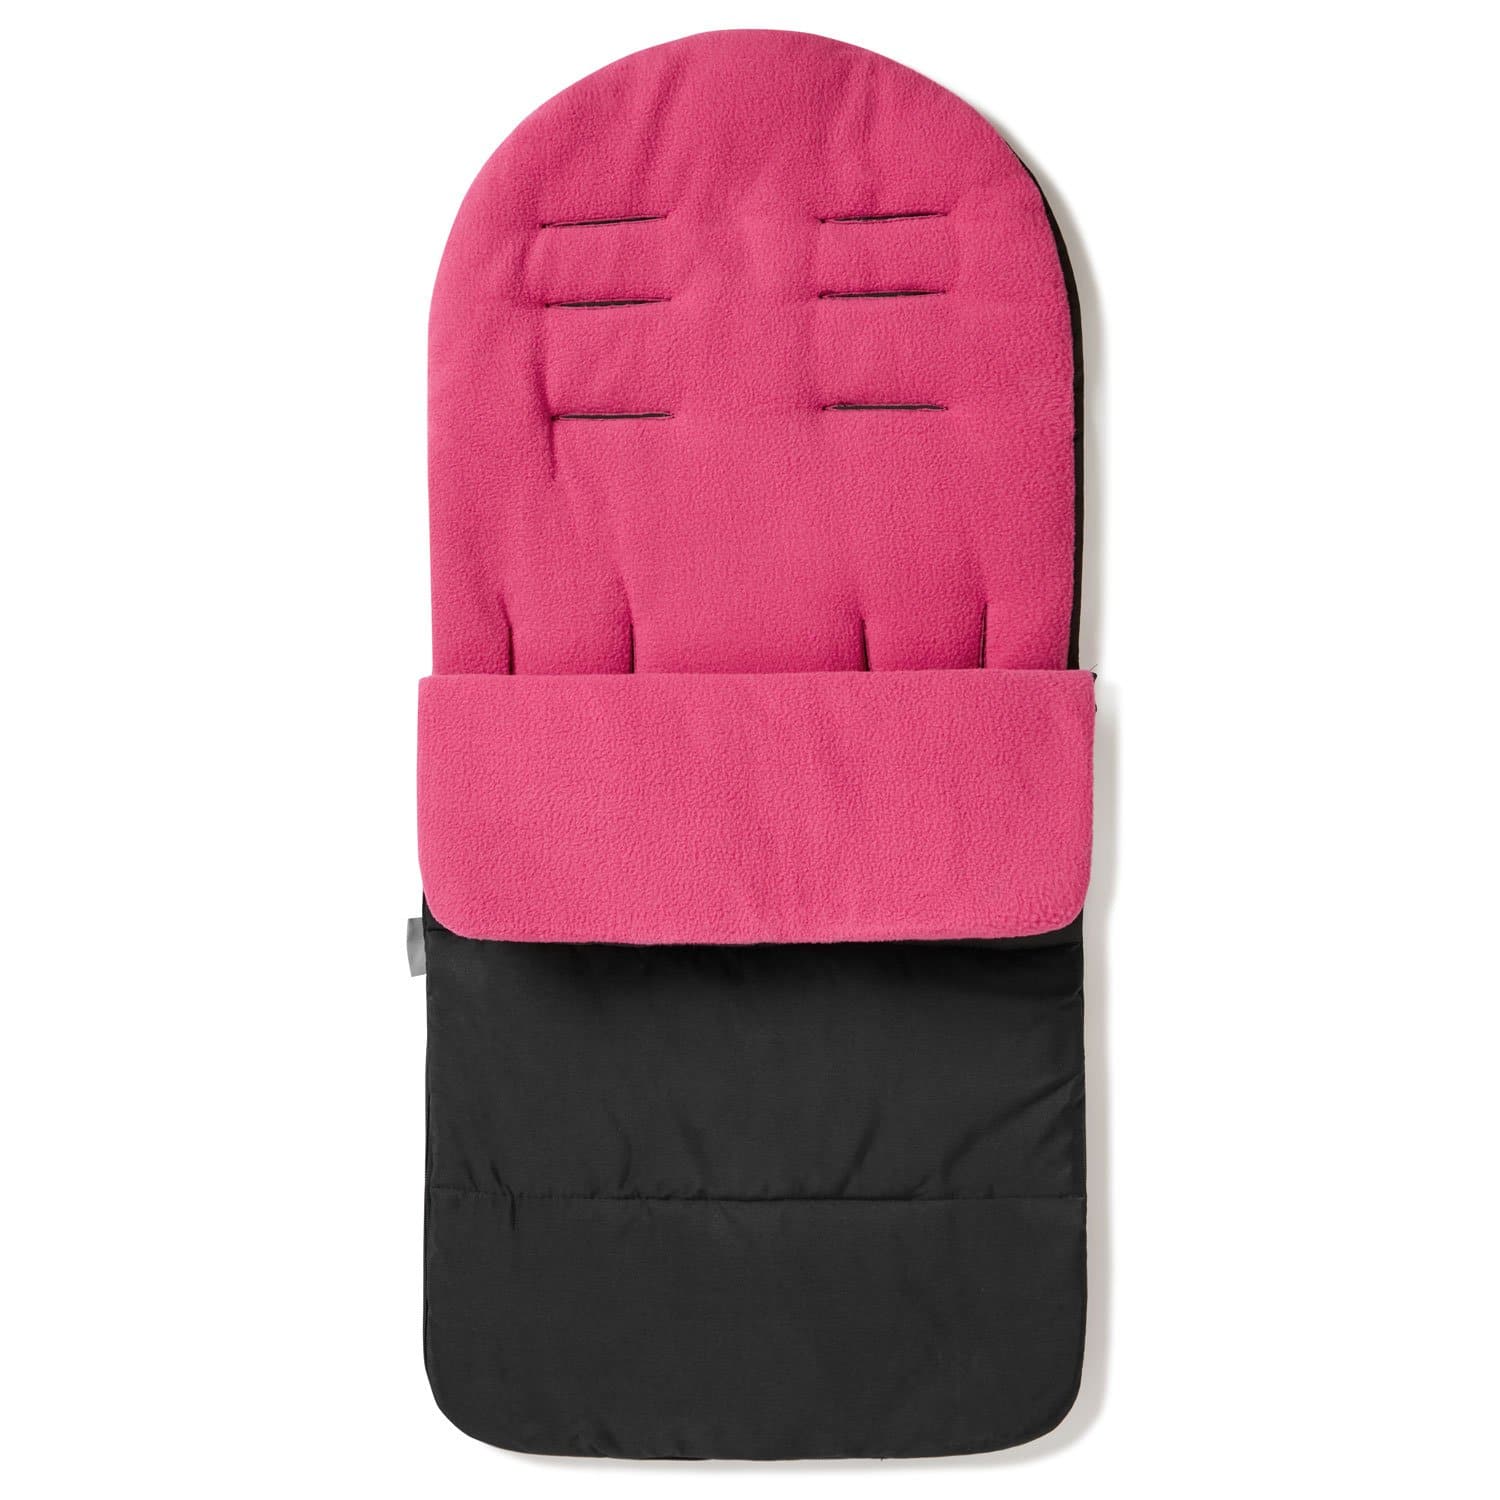 Premium Footmuff / Cosy Toes Compatible with Stokke - For Your Little One